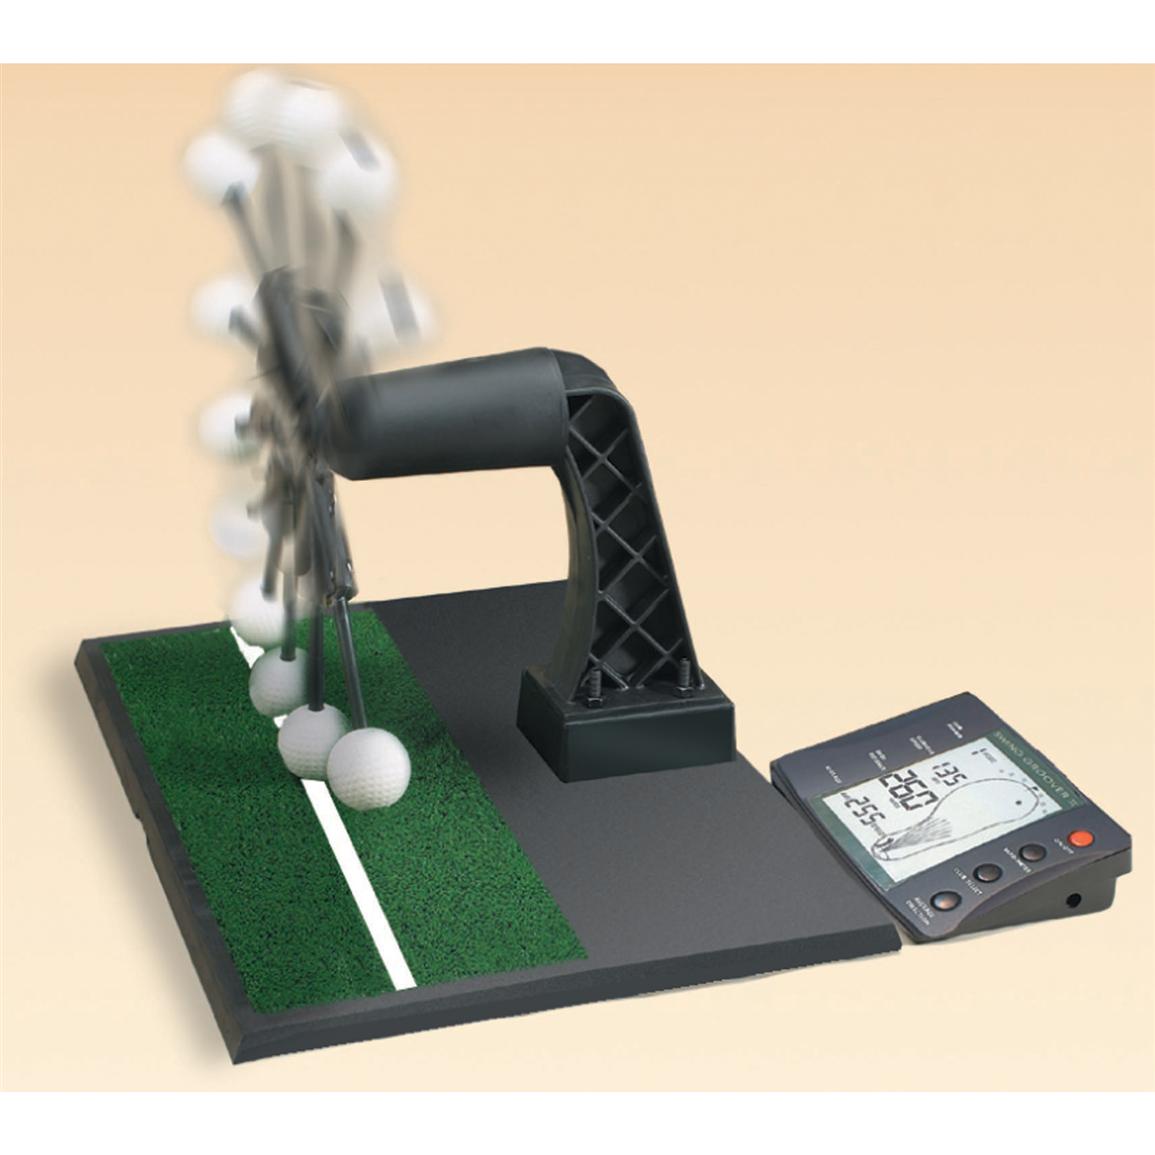 Club Champ® Electronic Swing Groover II - 181014, at Sportsman's Guide